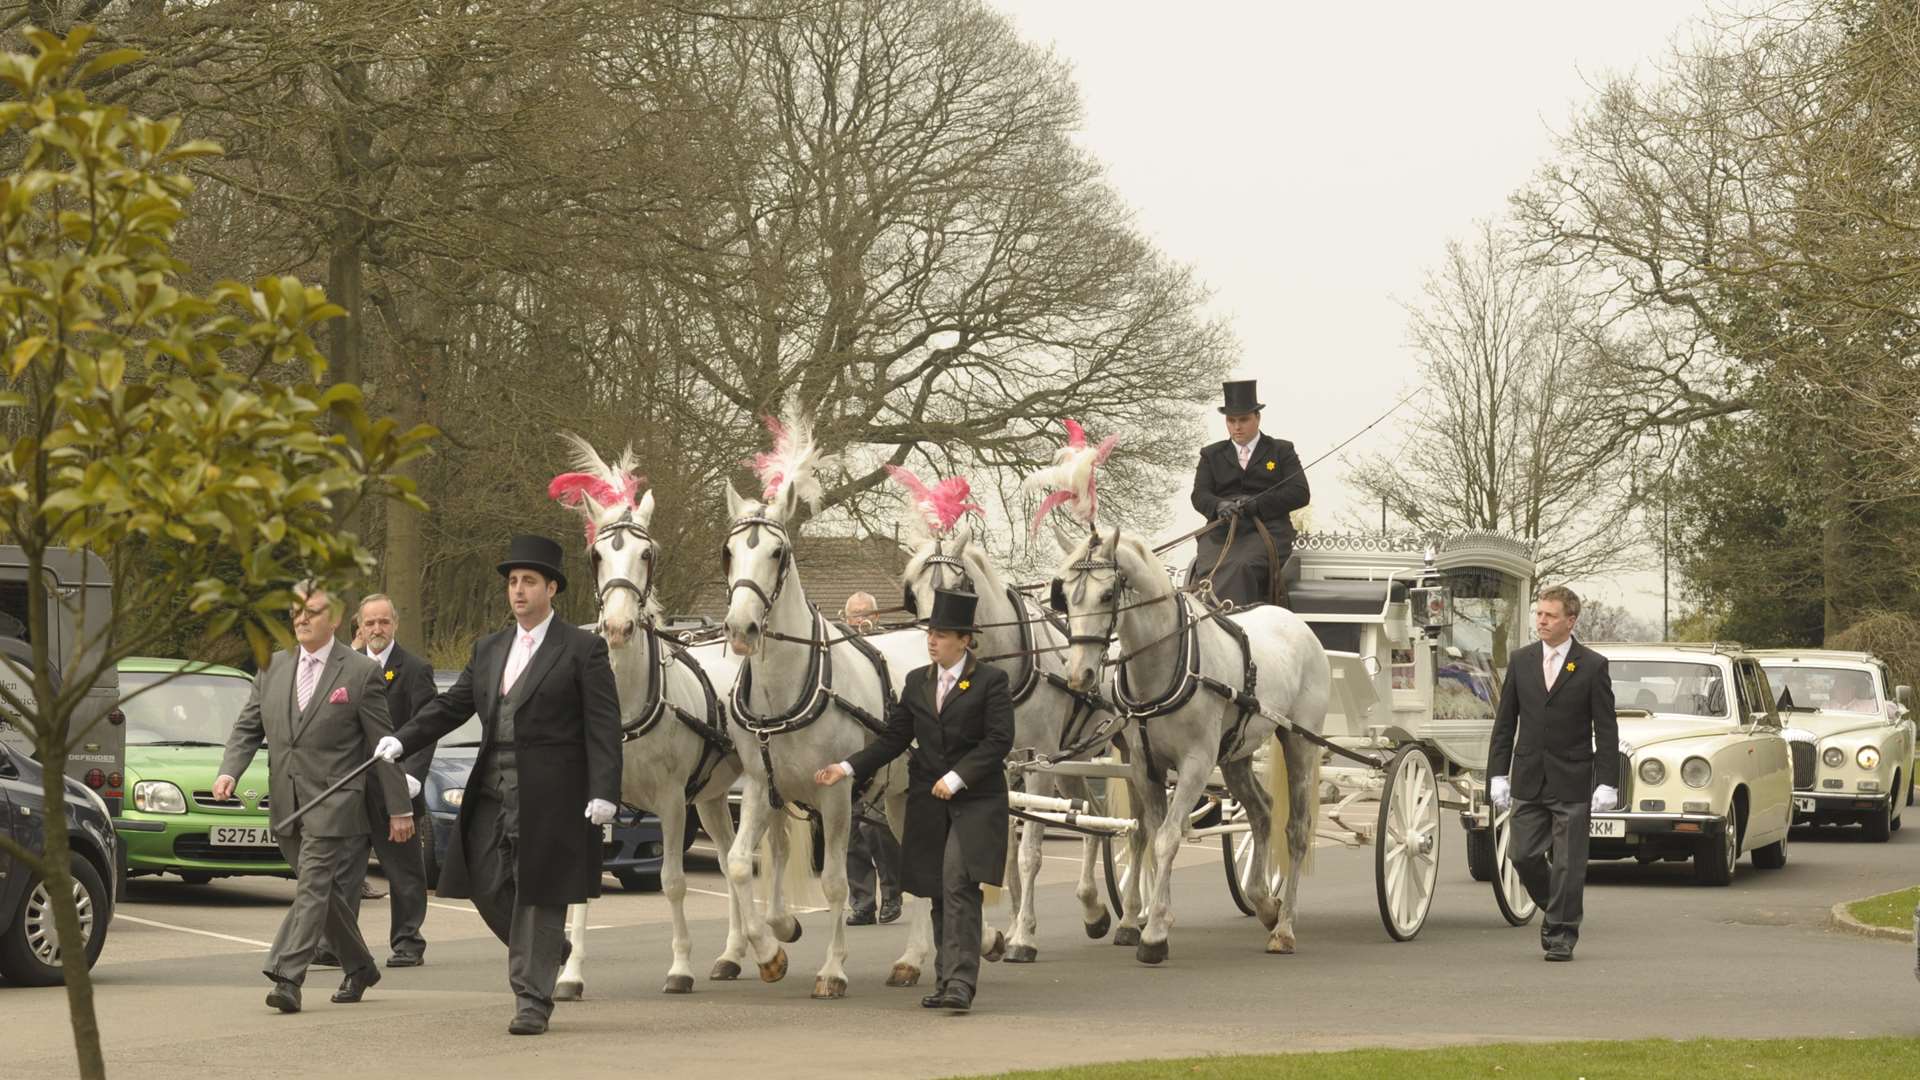 Stacey Mowle's funeral cortege at Medway Crematorium, Chatham